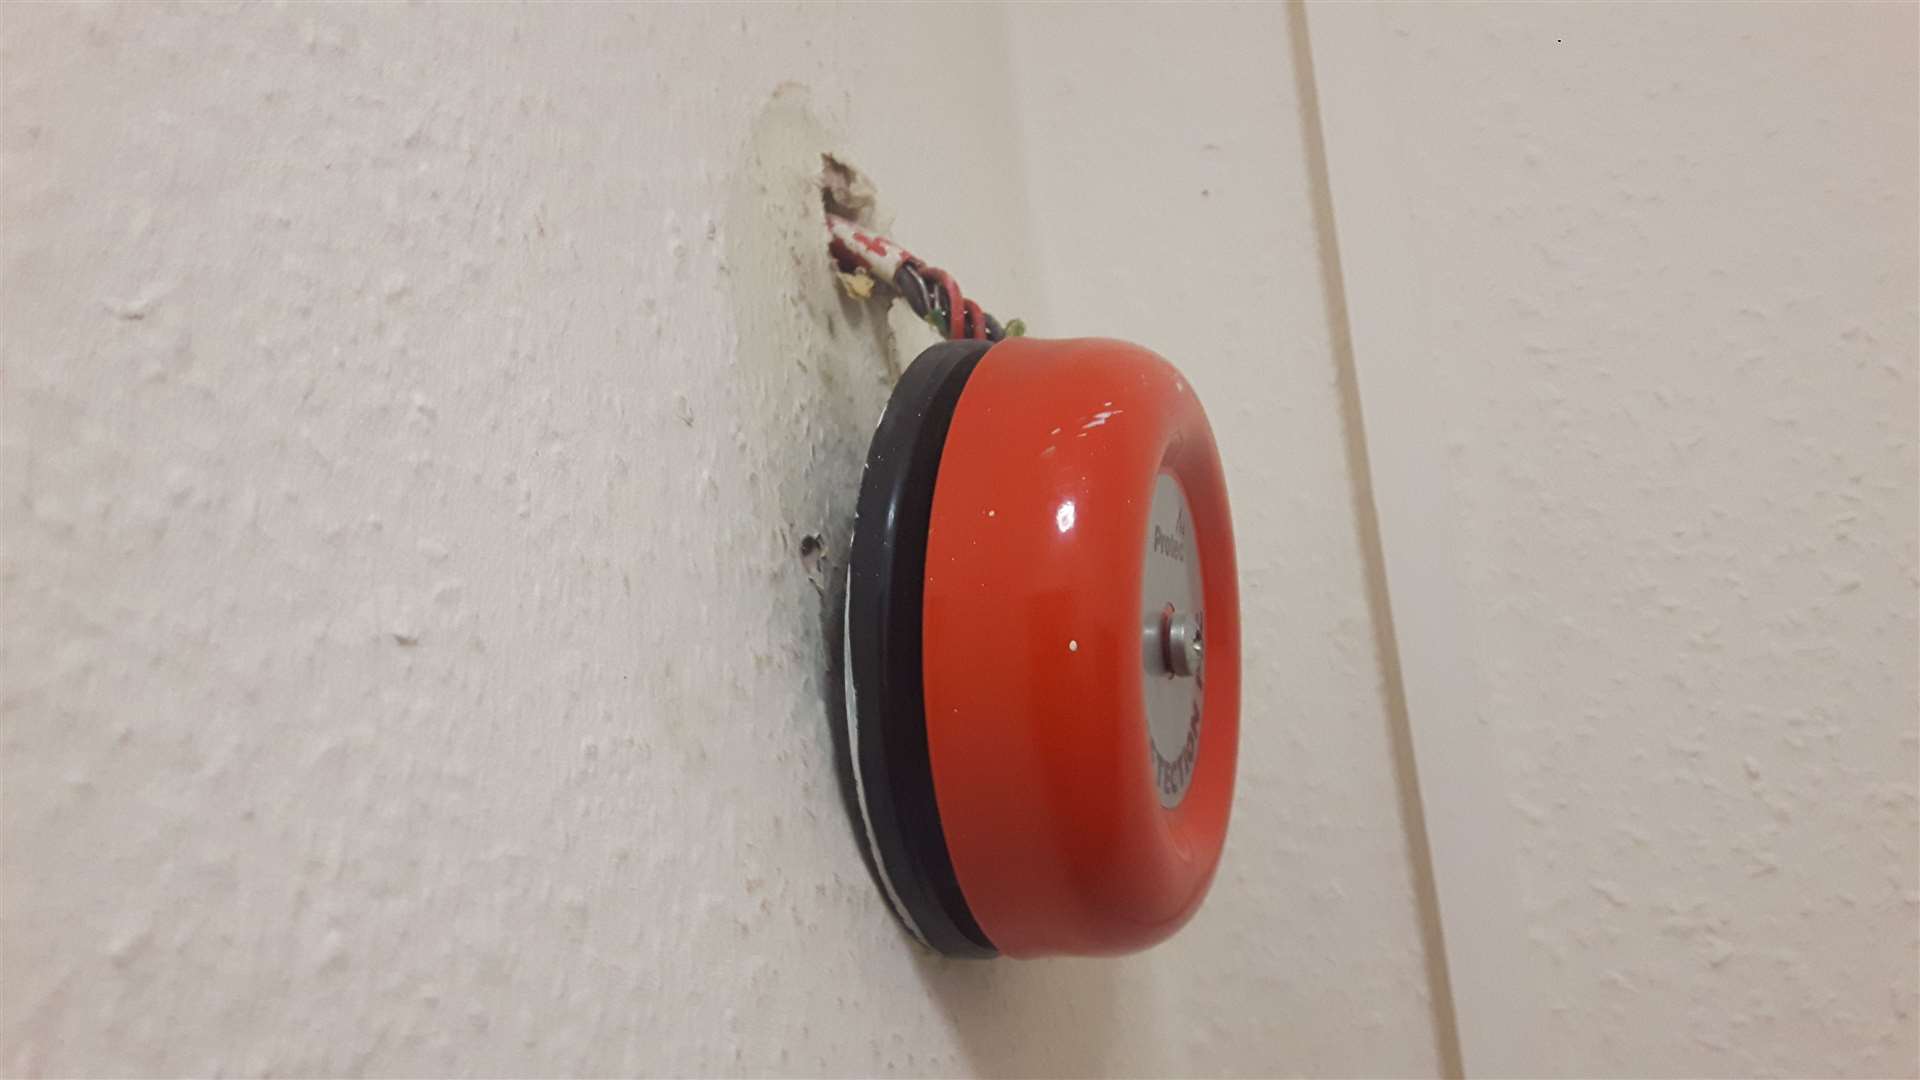 The council needs to get fire alarms checked